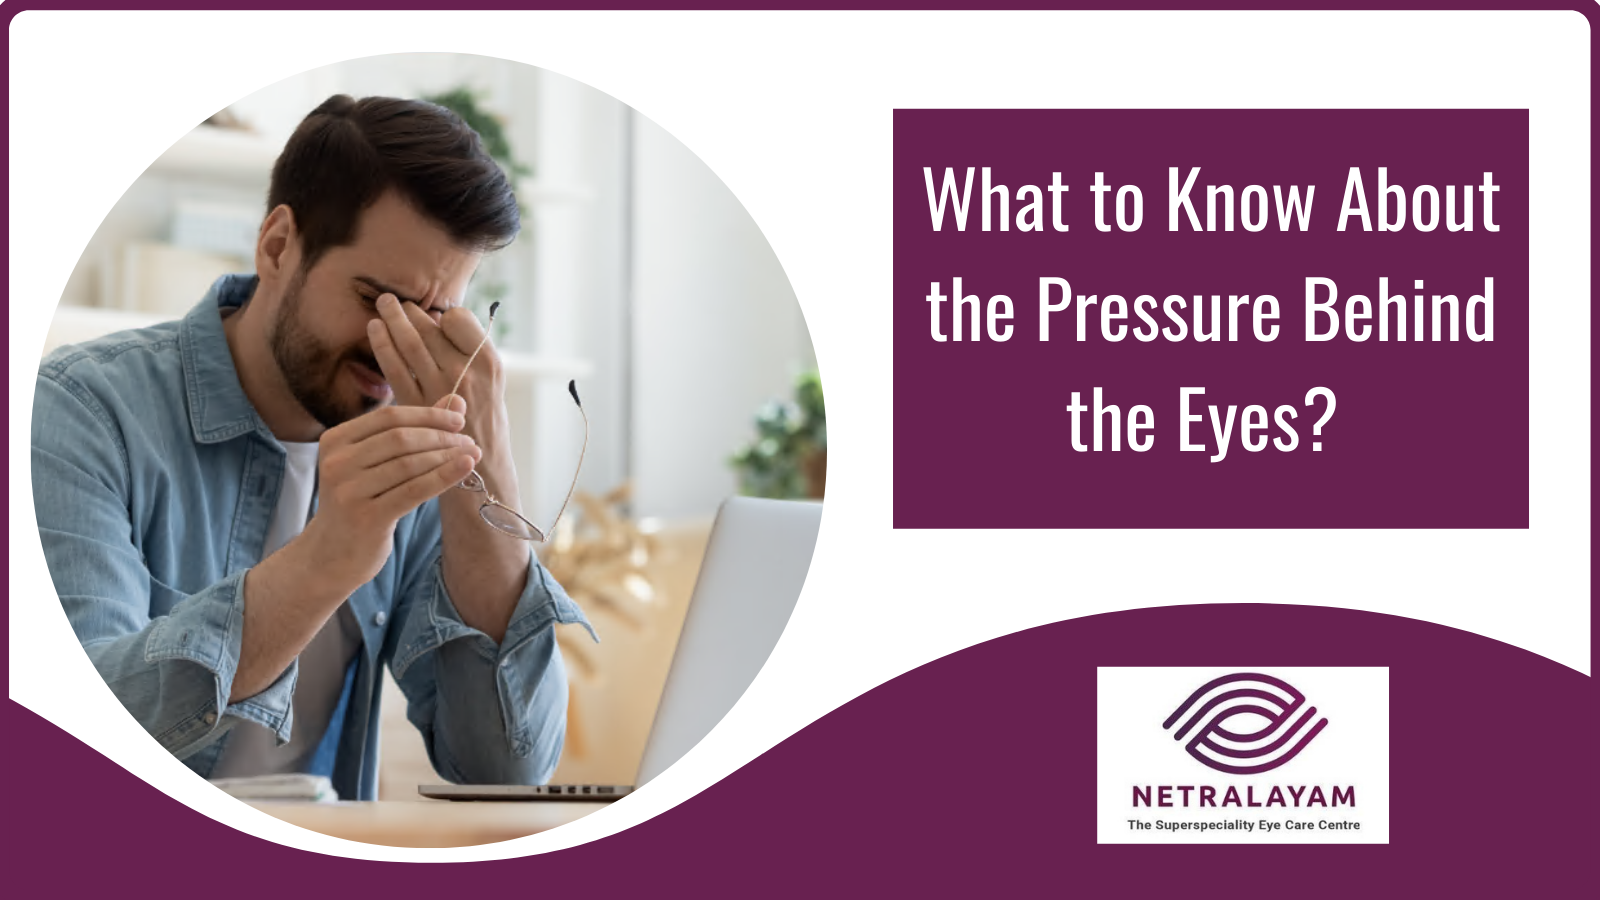 What to Know About the Pressure Behind the Eyes?